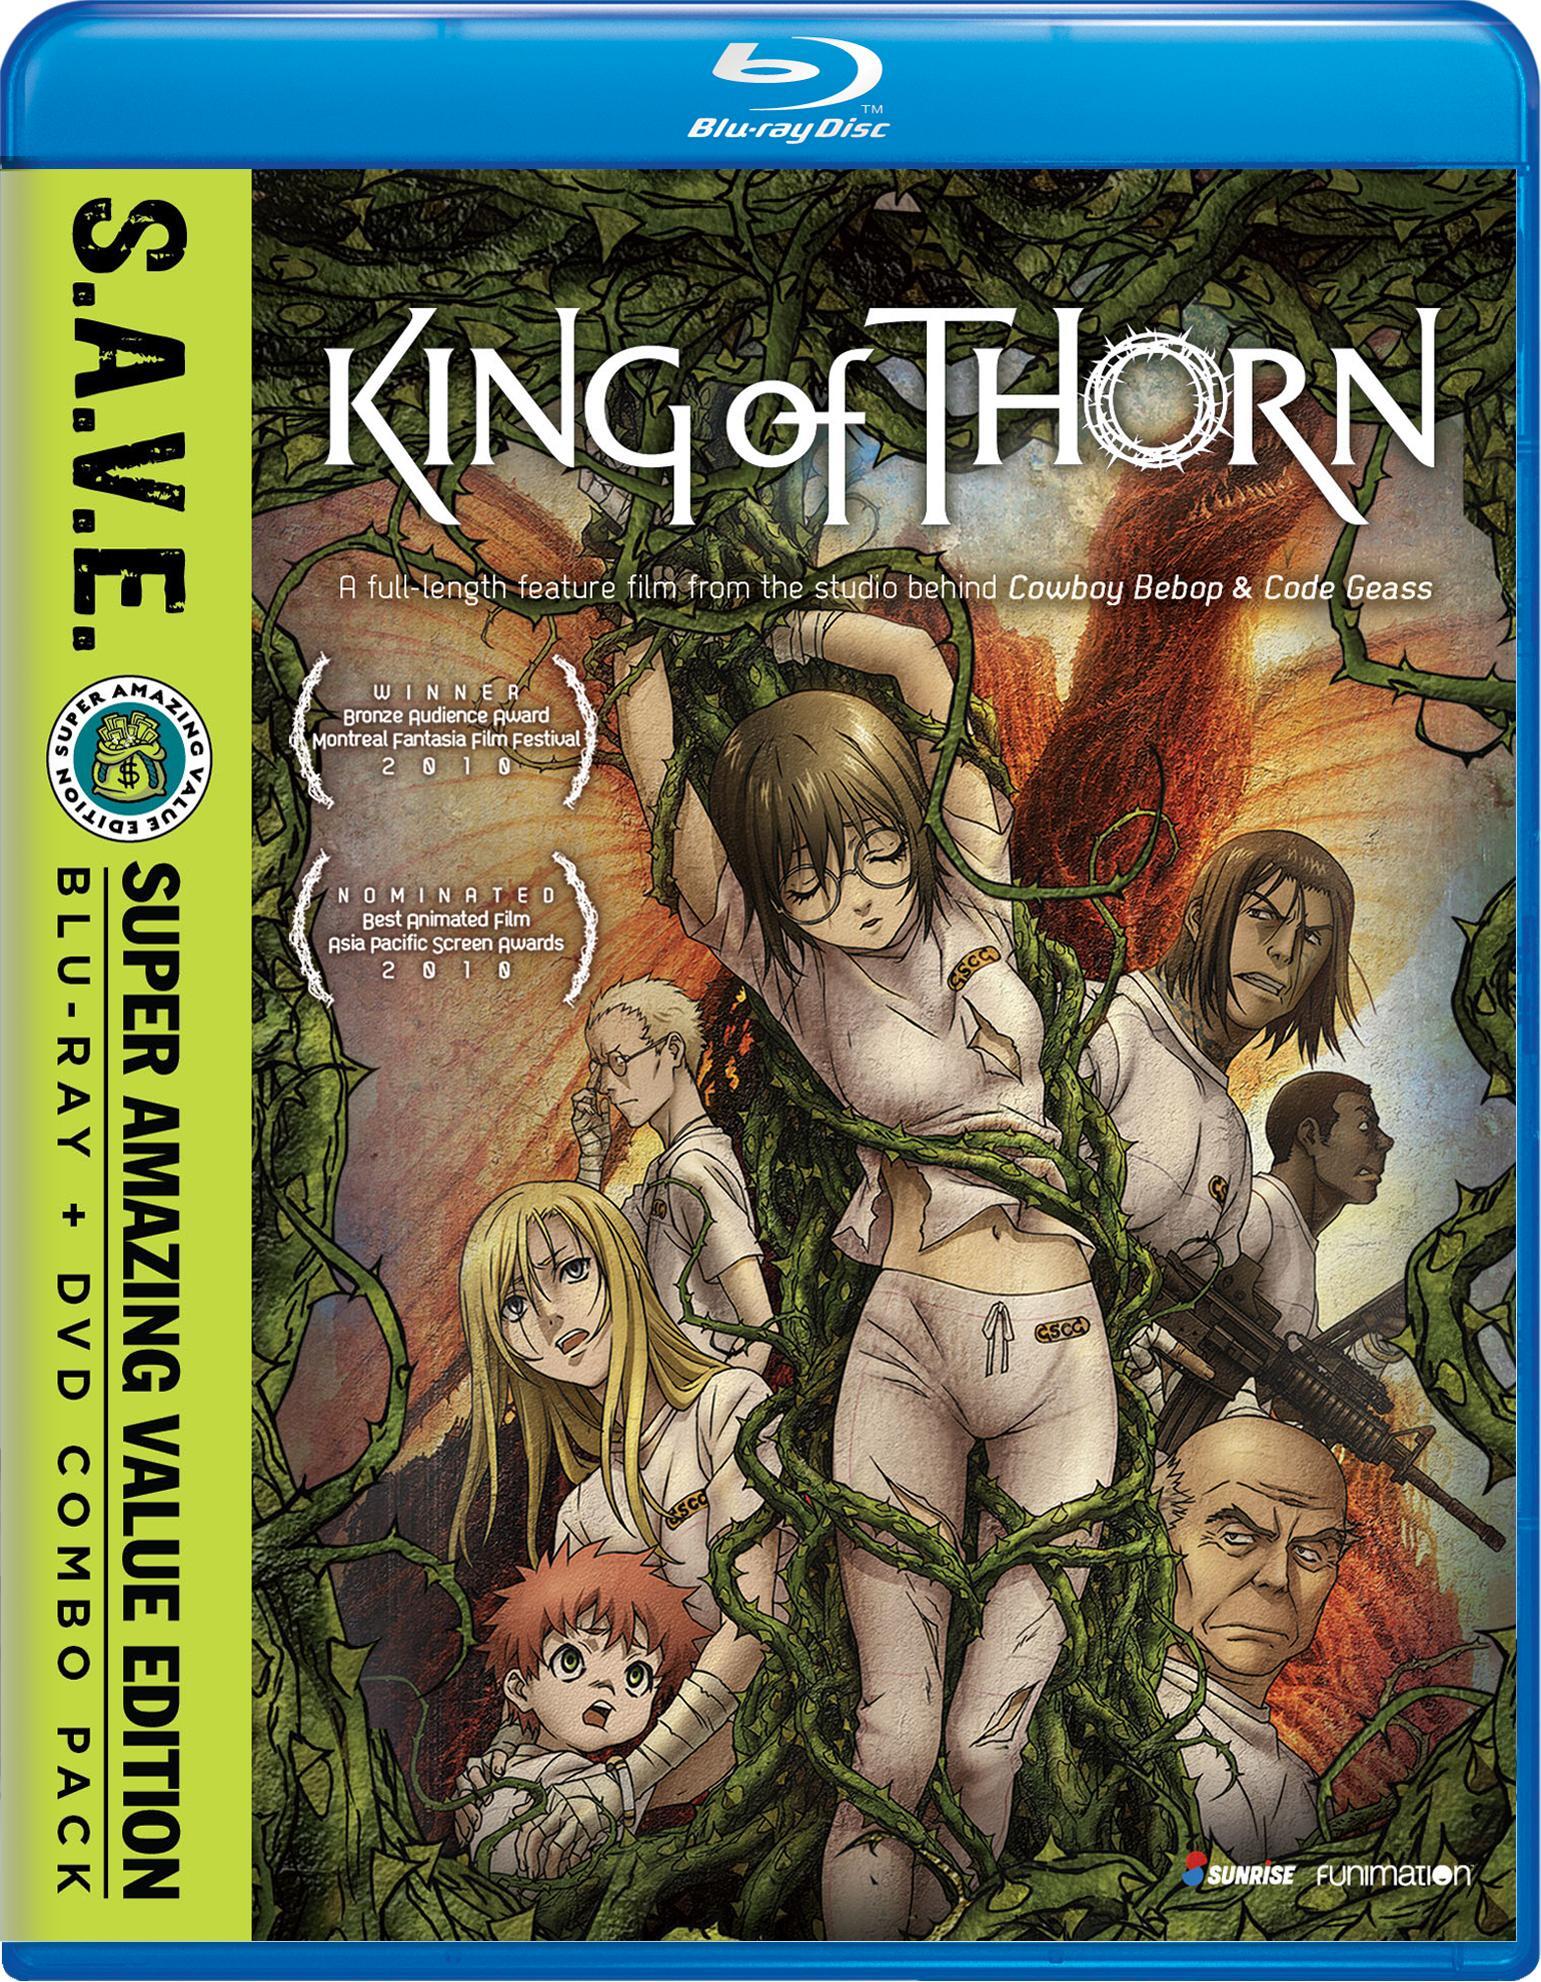 King Of Thorn (with DVD) - Blu-ray [ 2009 ]  - Anime Movies On Blu-ray - Movies On GRUV